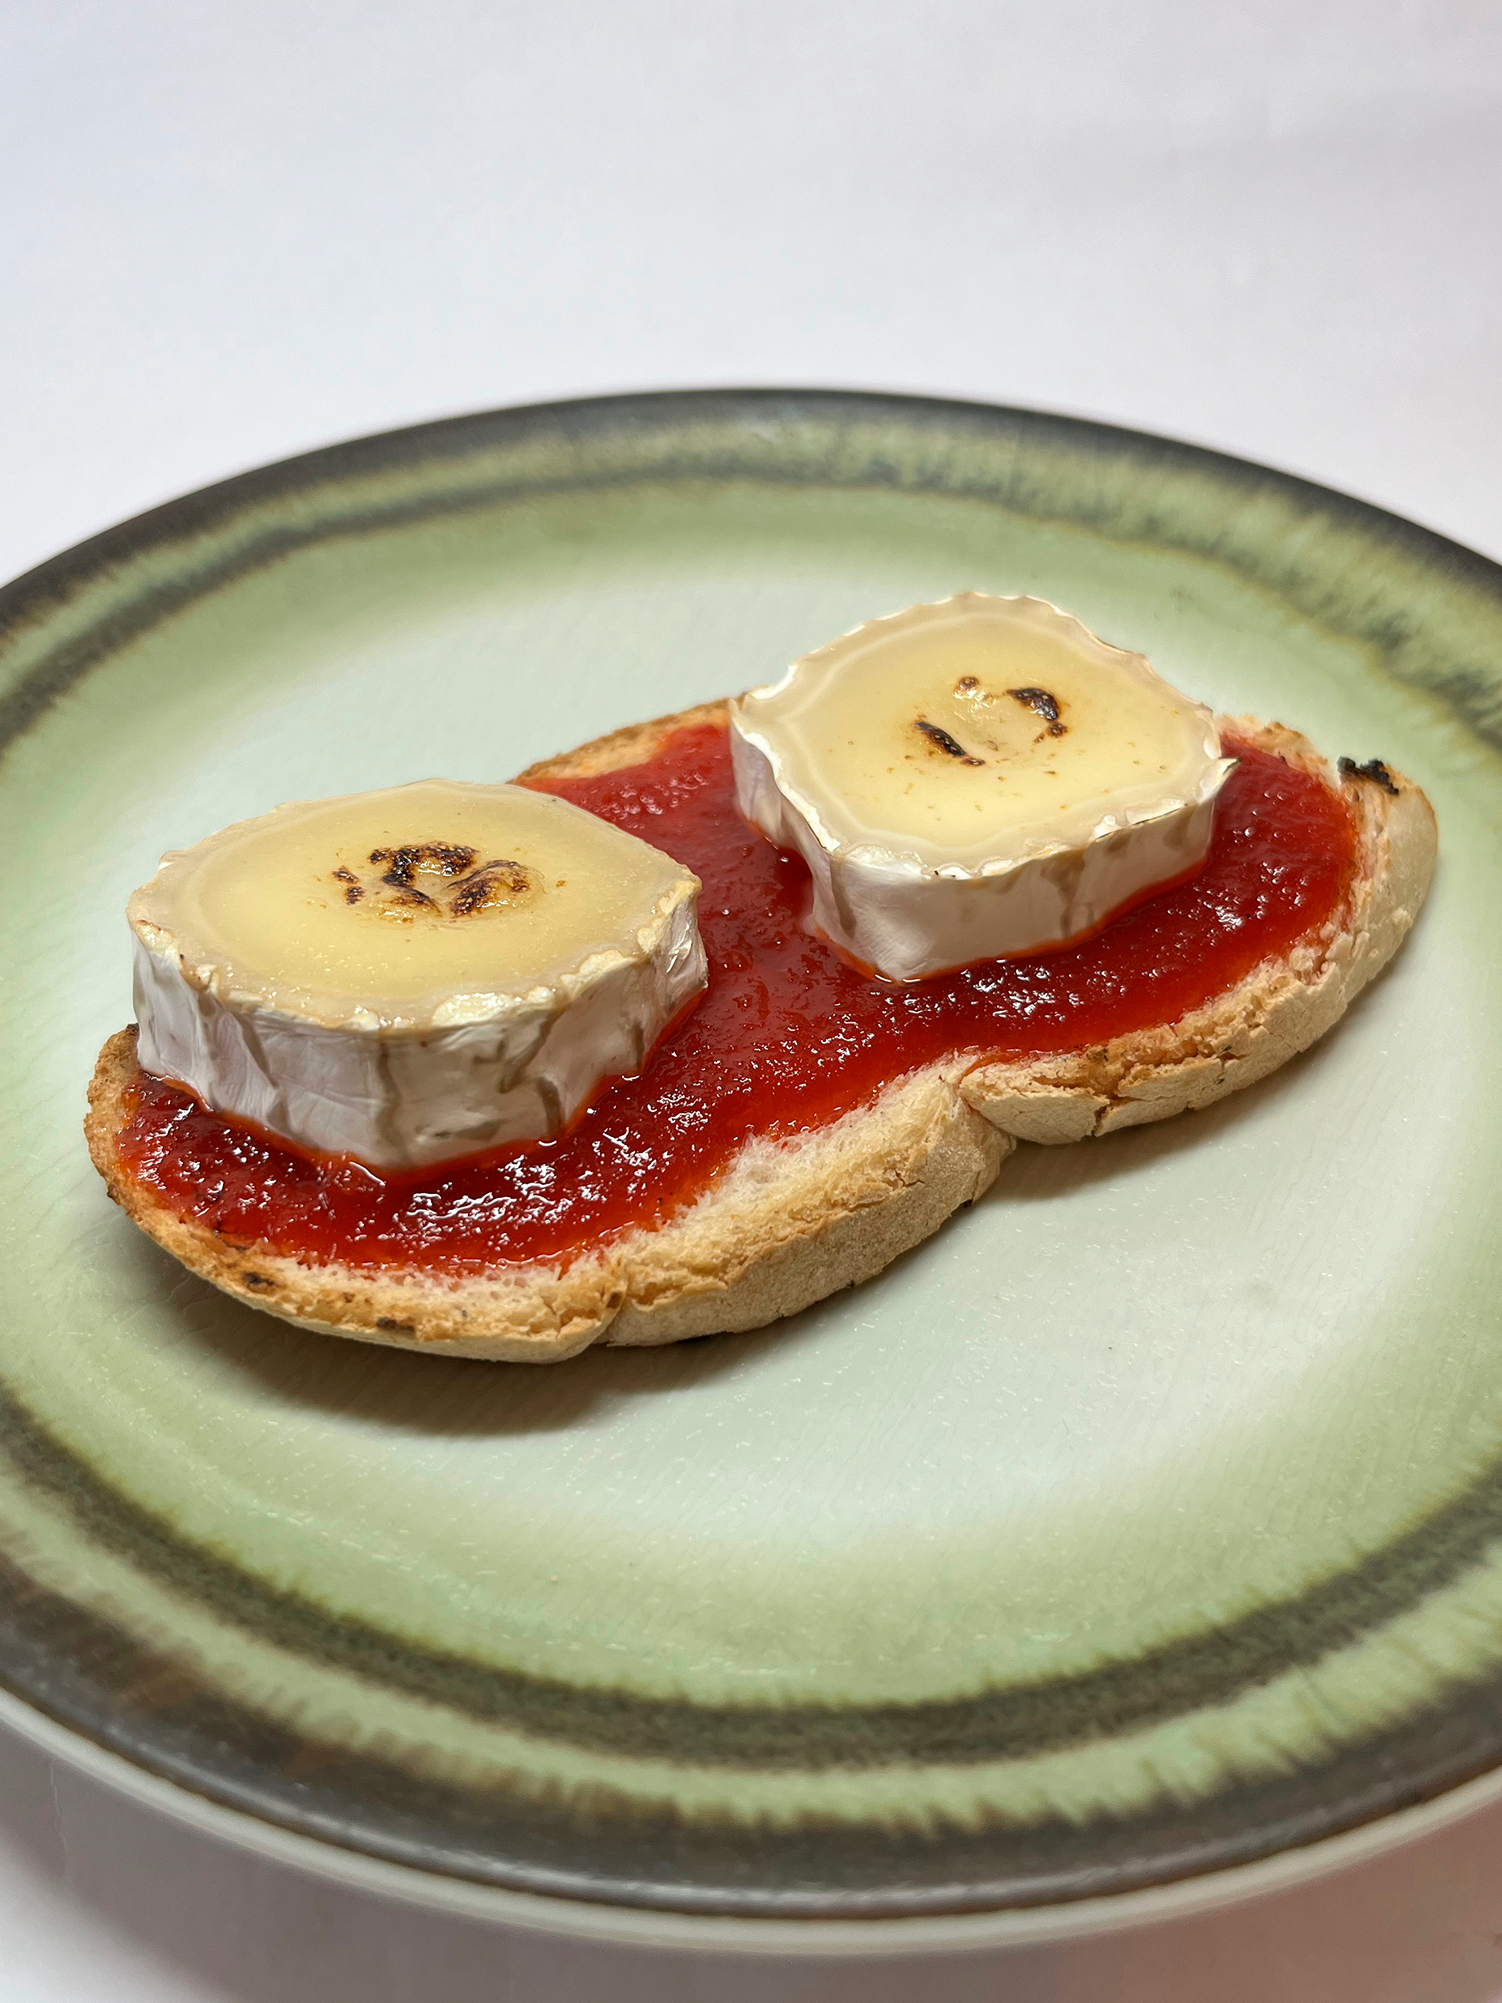 PAYOYO CHEESE WITH HOMEMADE RED PEPPER JAM